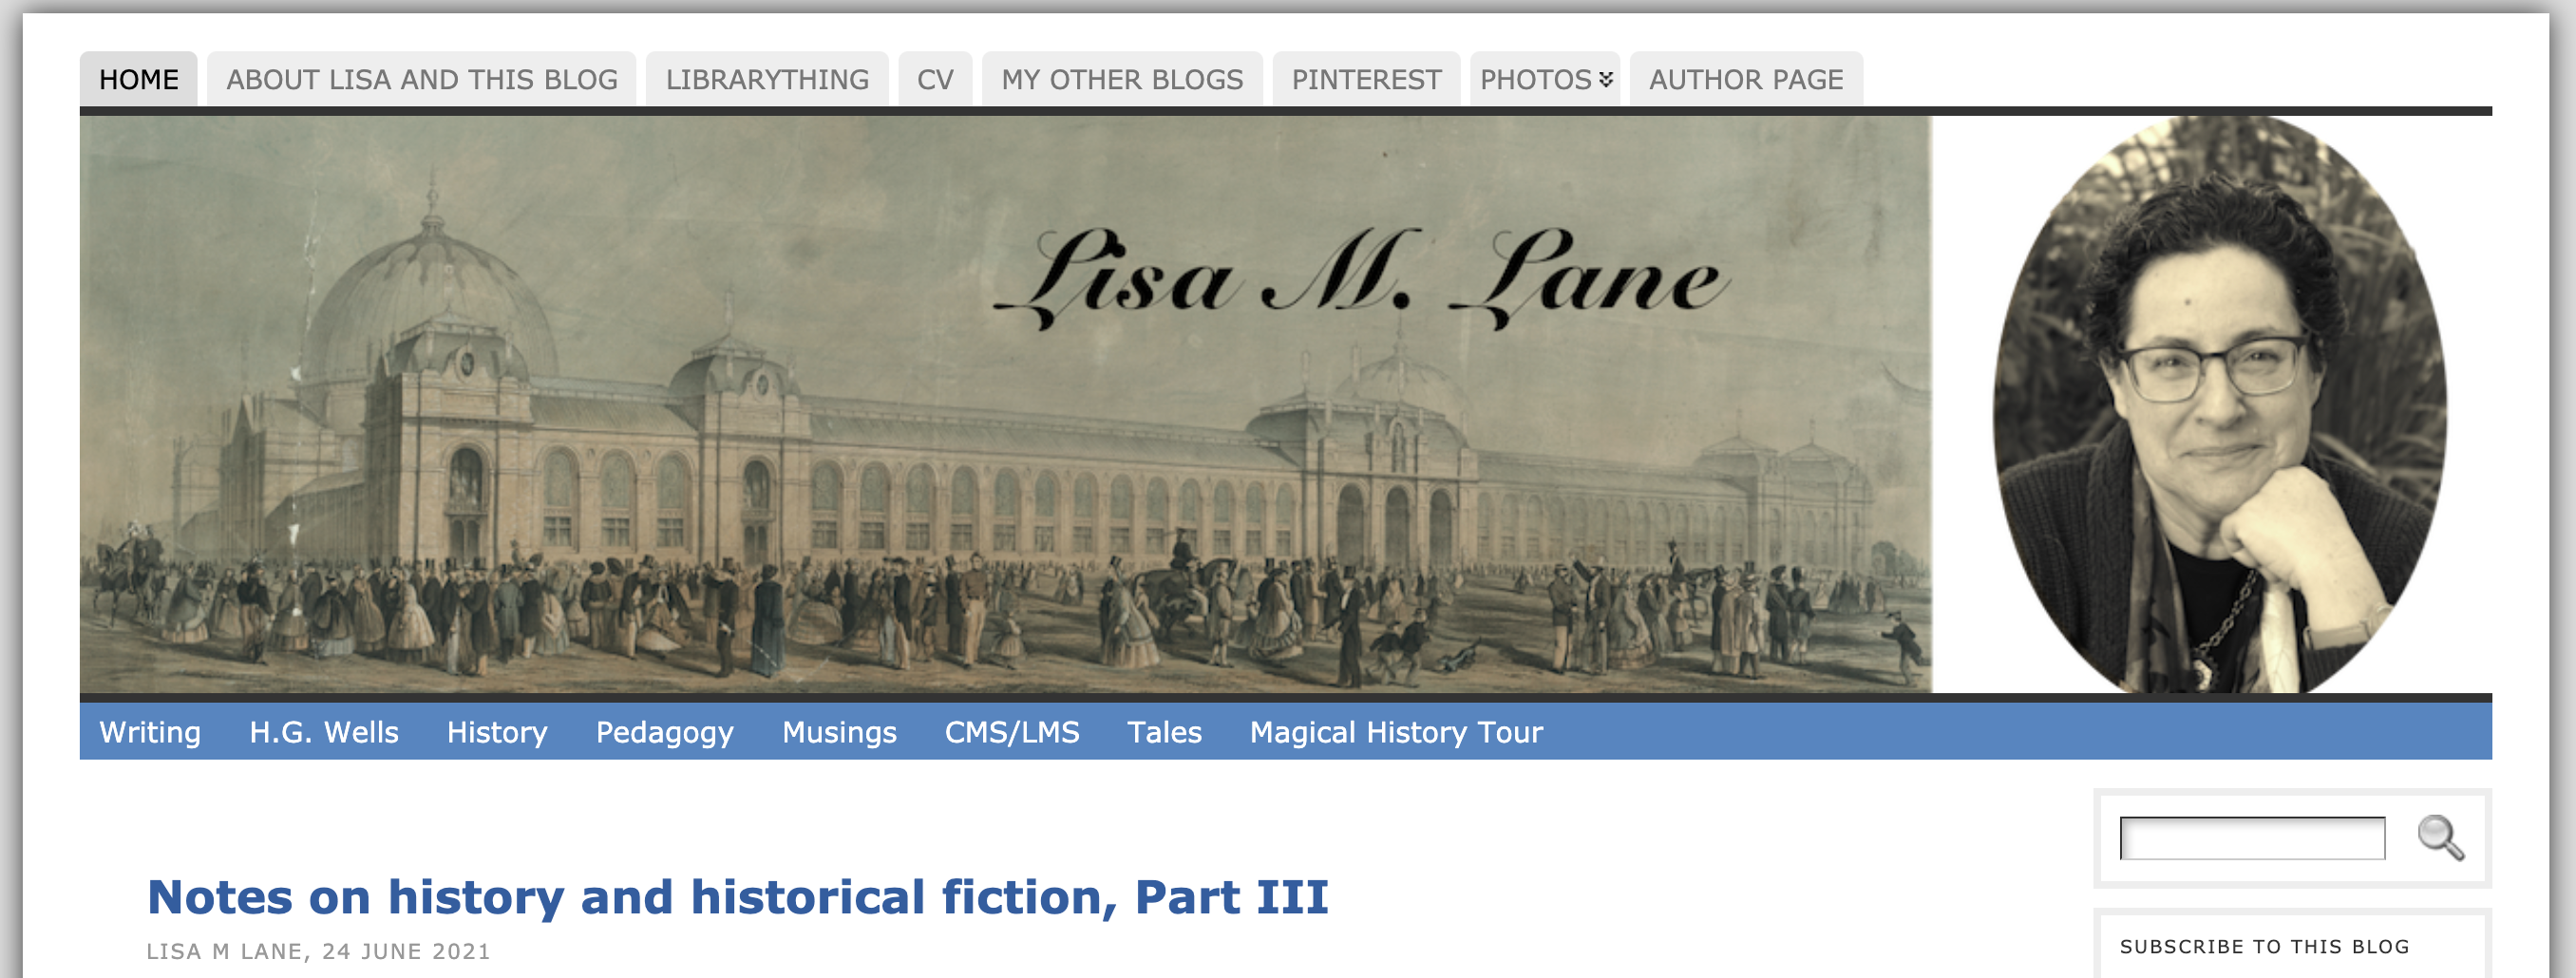 Homepage of Lisa Lane's website with image of her and old victorian style building.